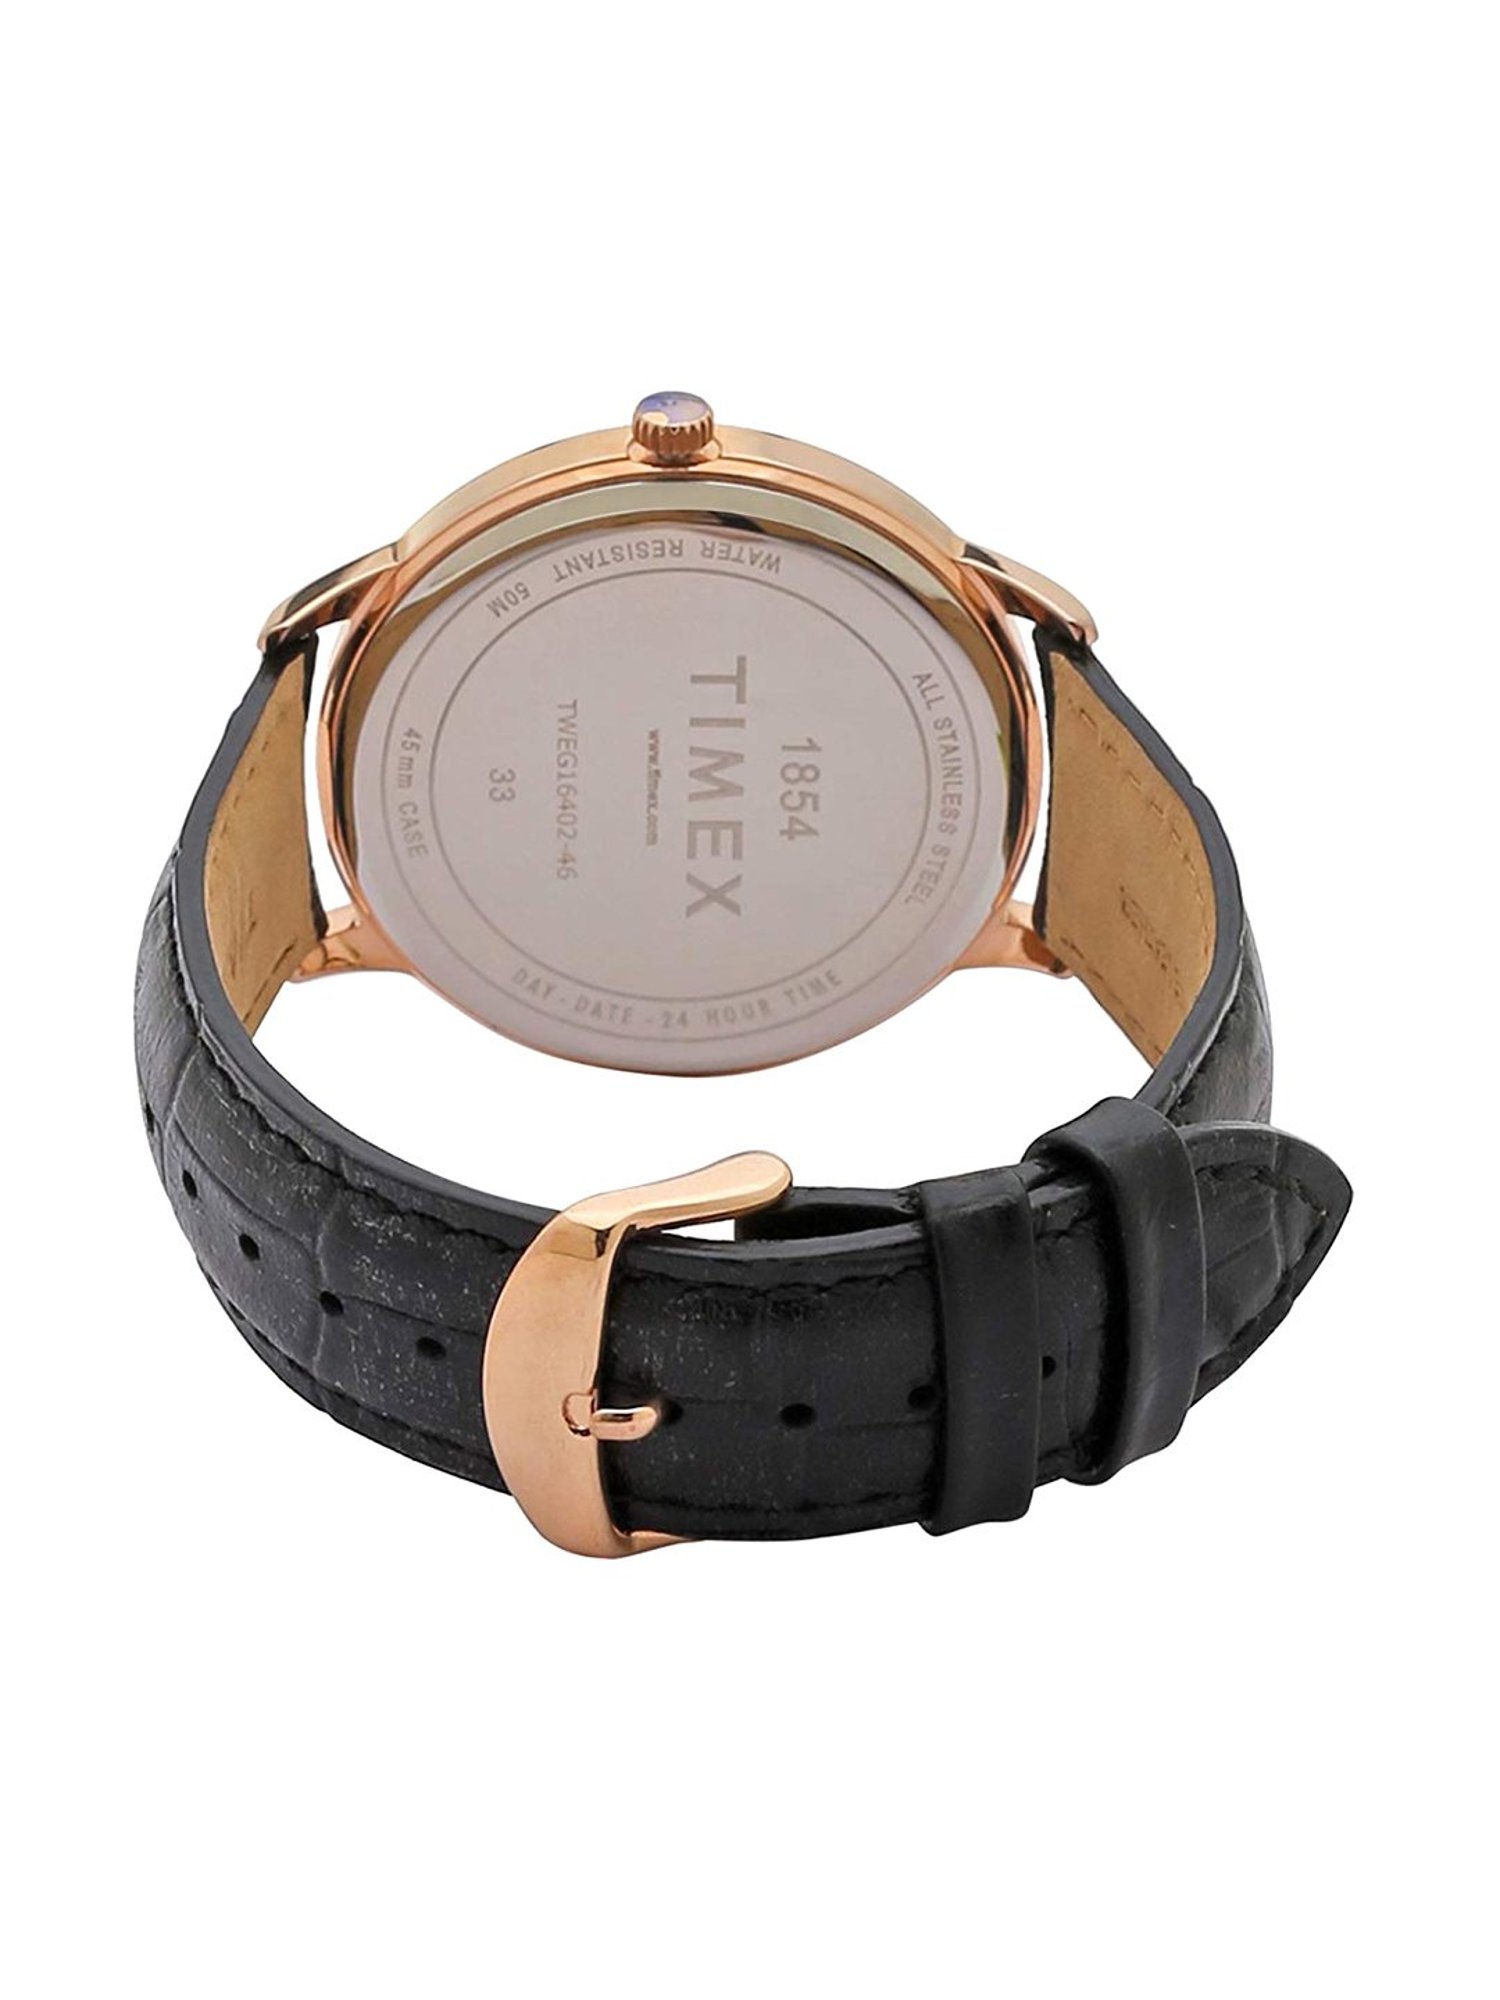 TIMEX G503 Watch - For Women in Delhi at best price by Samay - Justdial